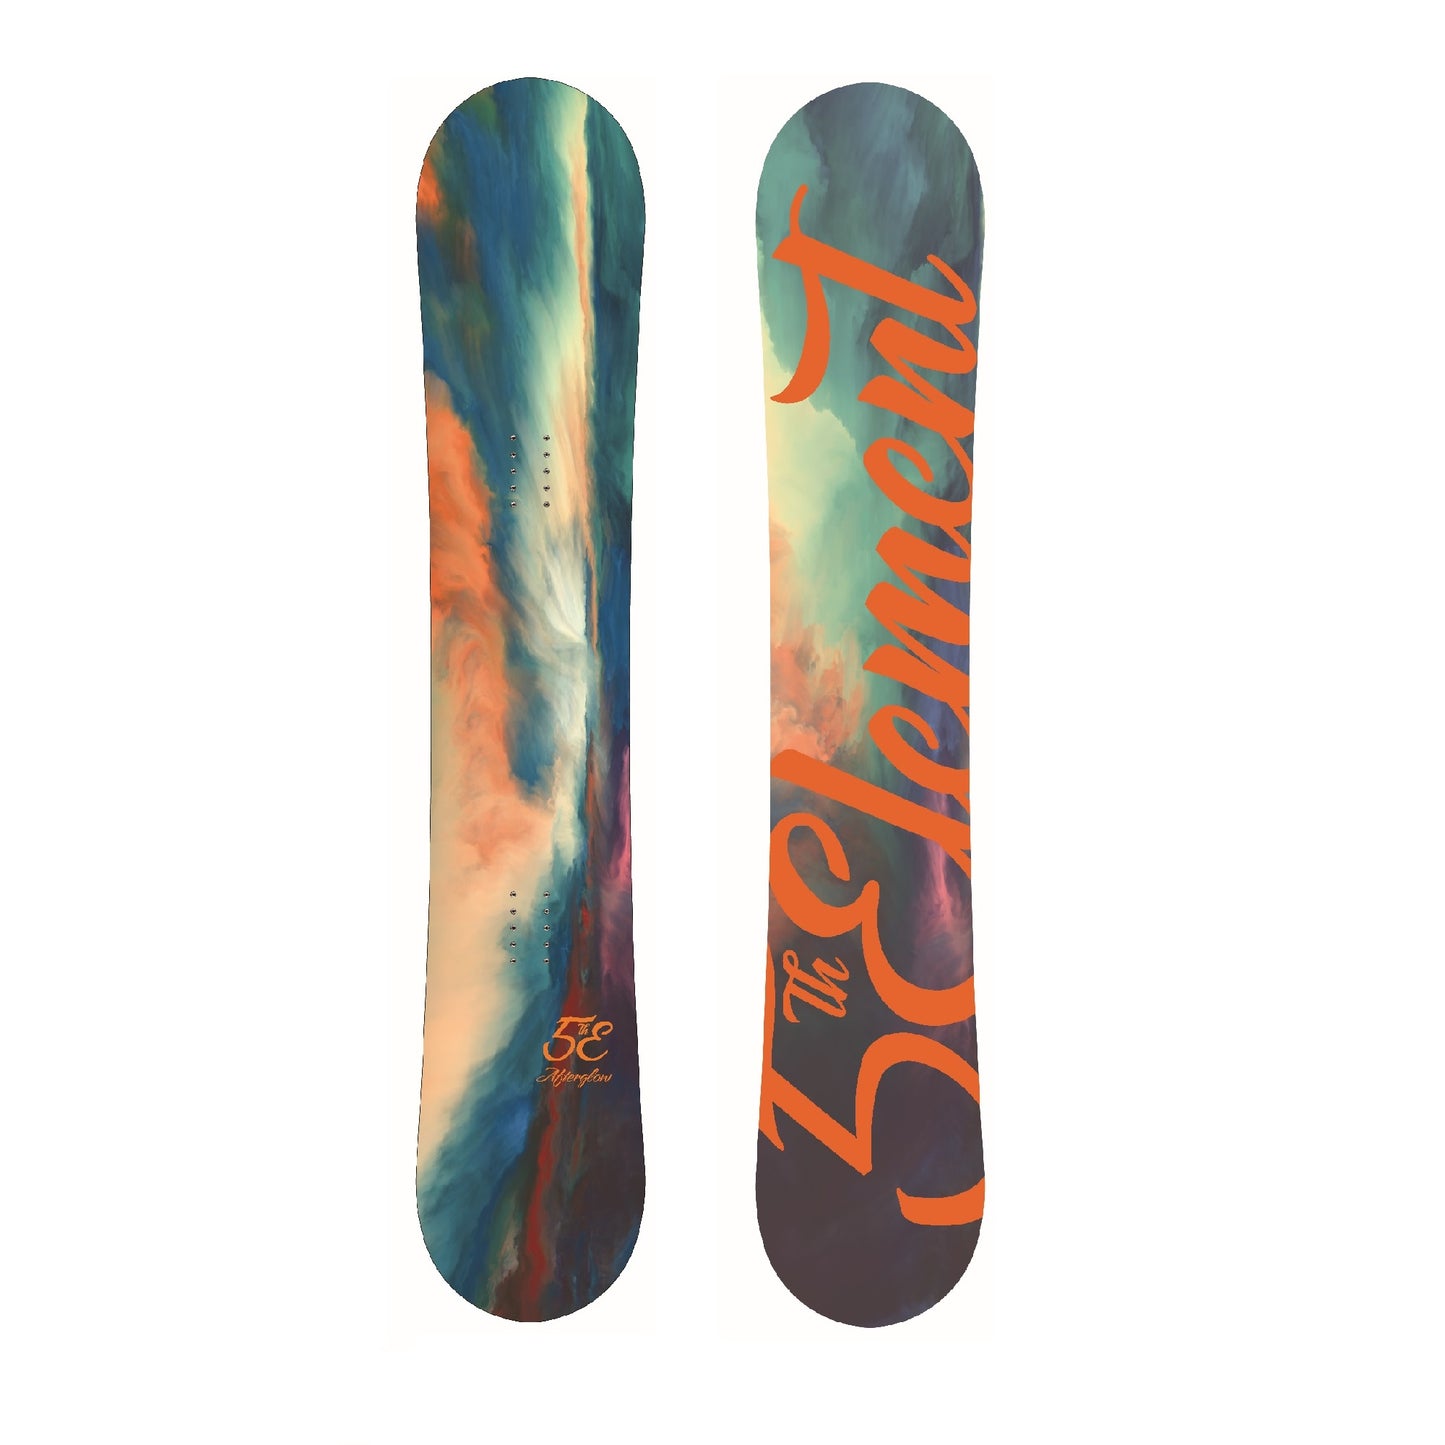 5th Element Afterglow Complete Snowboard Package - Black/Teal Black